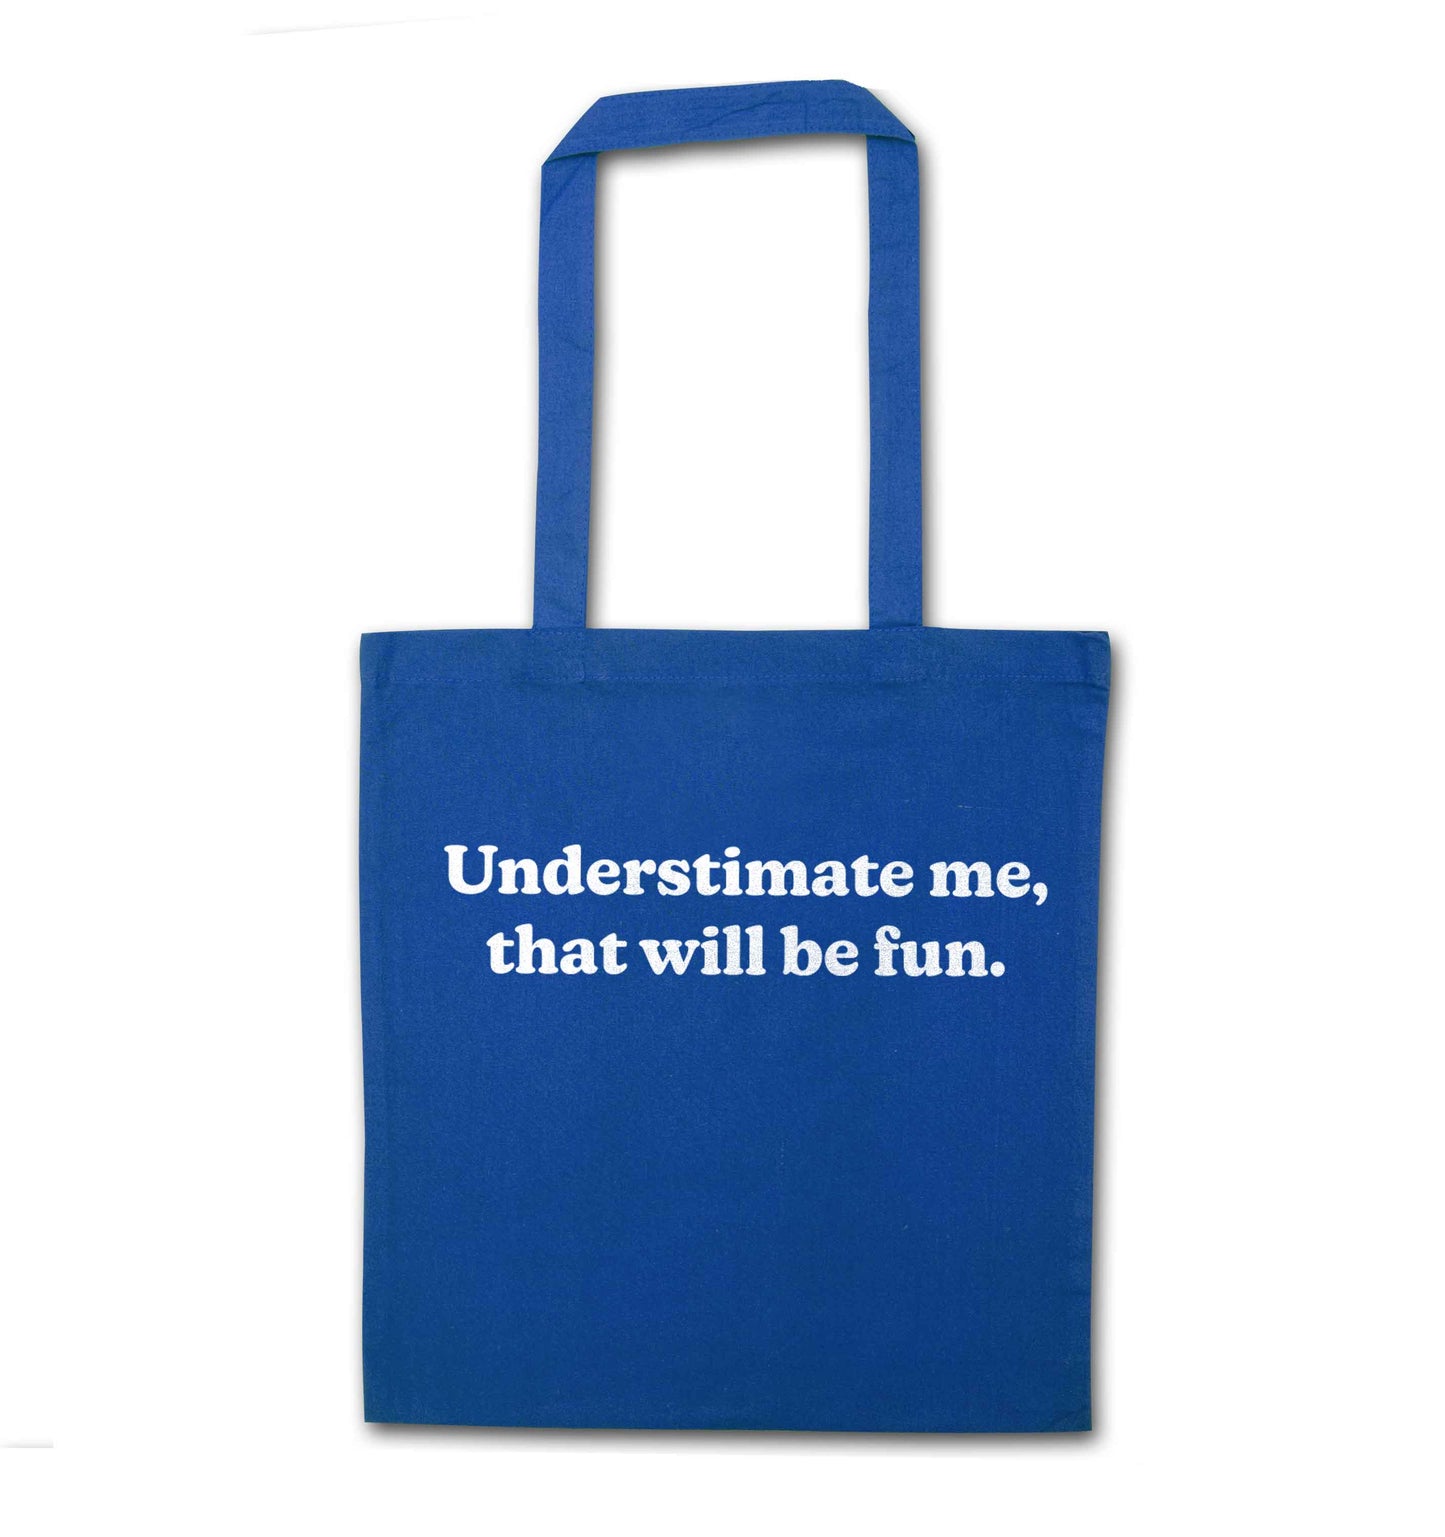 Underestimate me that will be fun blue tote bag